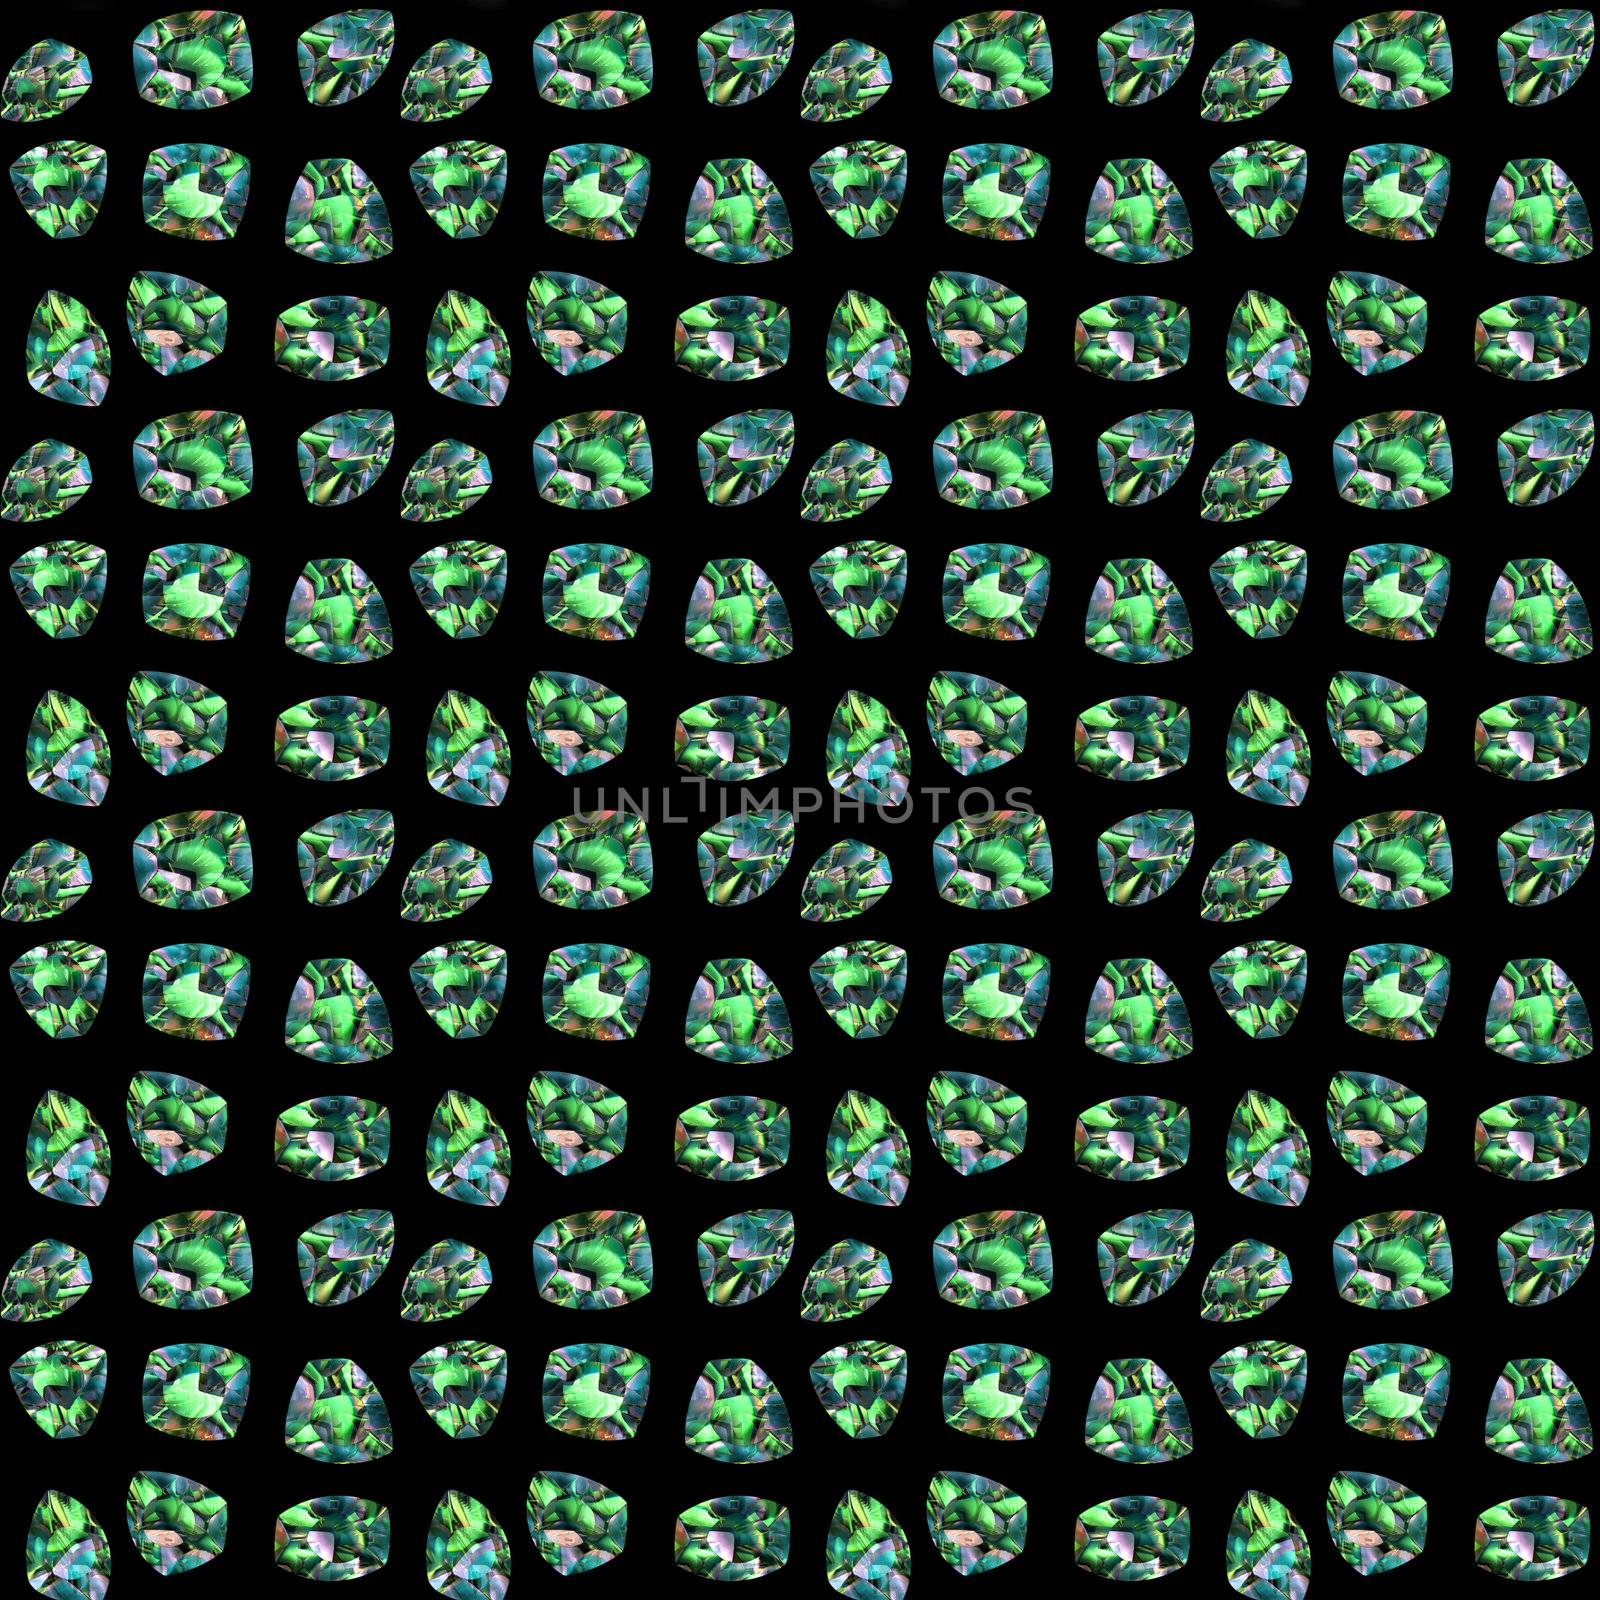 large image of a hoard of emerald gemstones on a black background